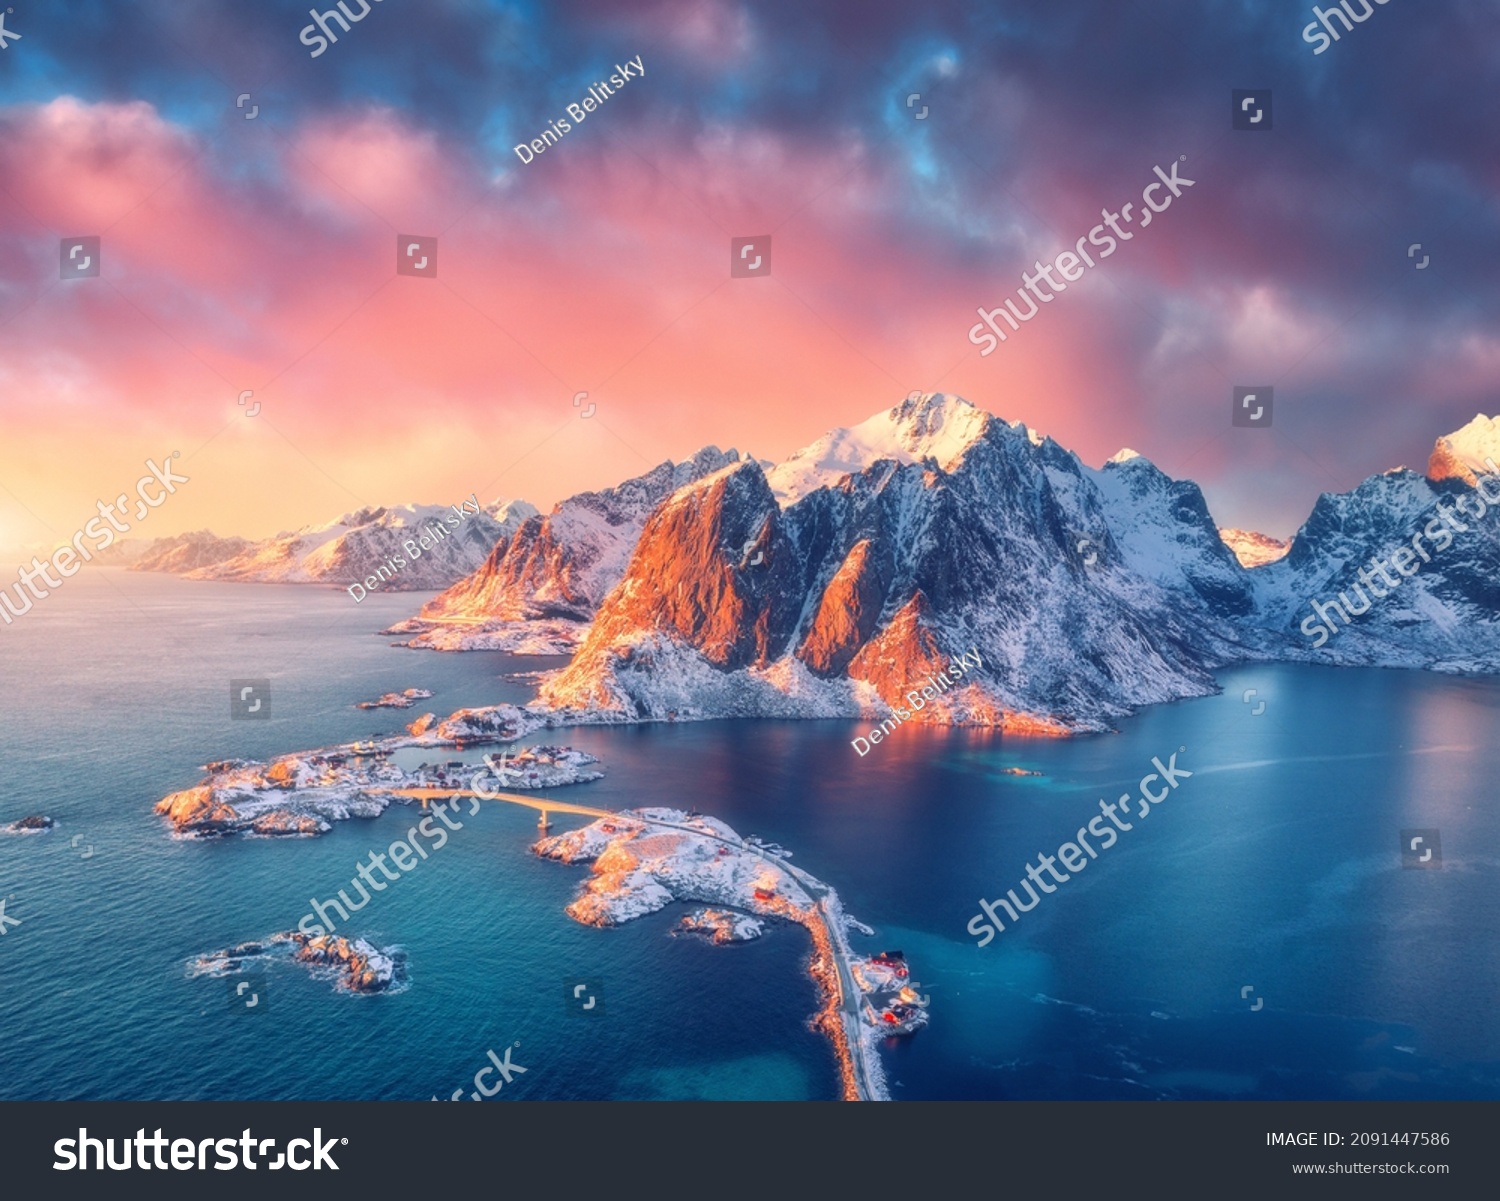 Beautiful landscape with blue sea, snowy mountains, rocks and islands, village, rorbu, road, bridge and pink sky at sunrise. Aerial view. Hamnoy in snow in winter in Lofoten islands, Norway. Top view #2091447586